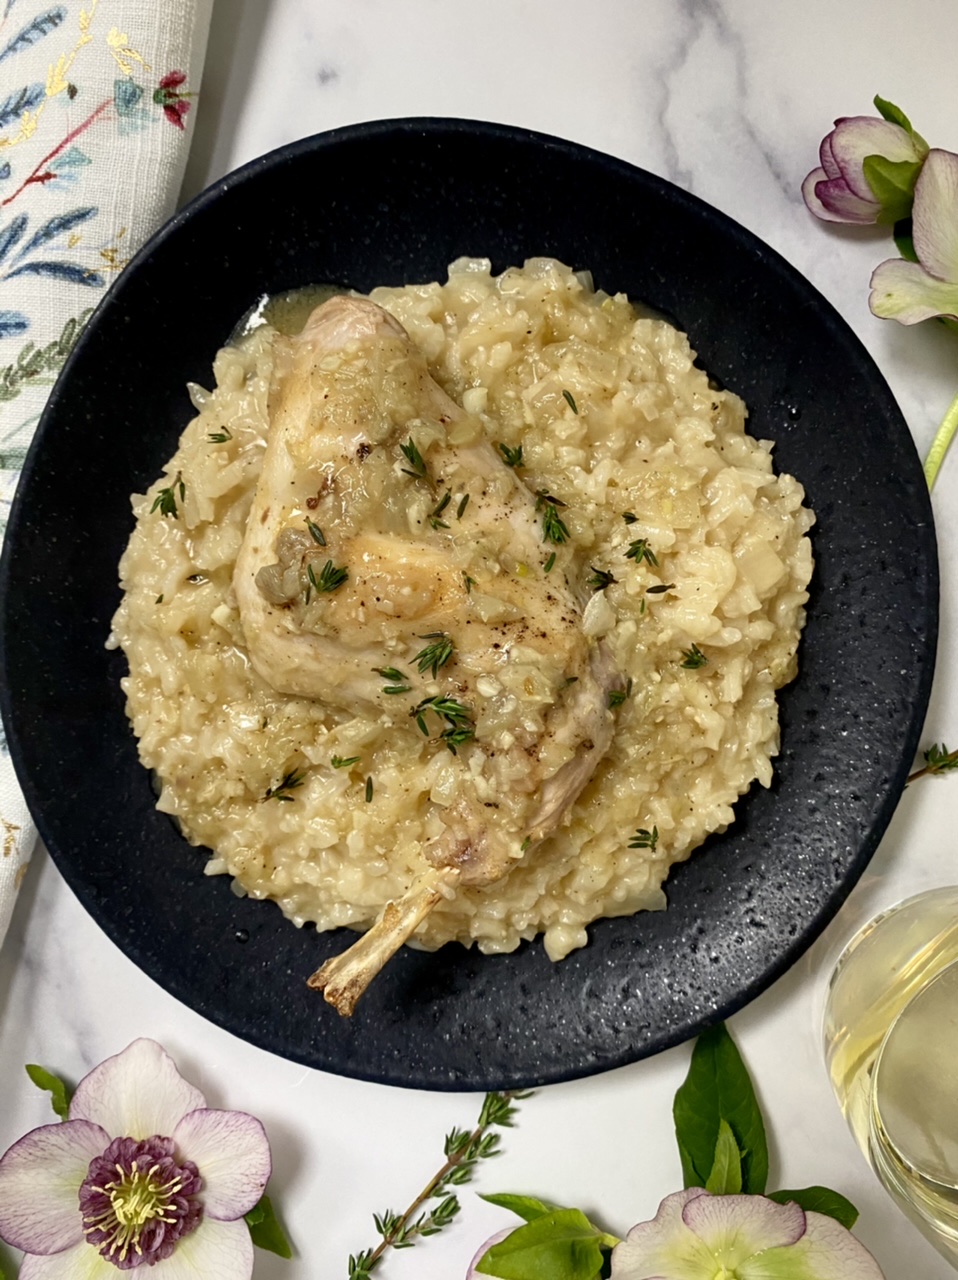 Roasted Leg of Rabbit & Risotto with Pan Sauce - the Old Woman and the Sea